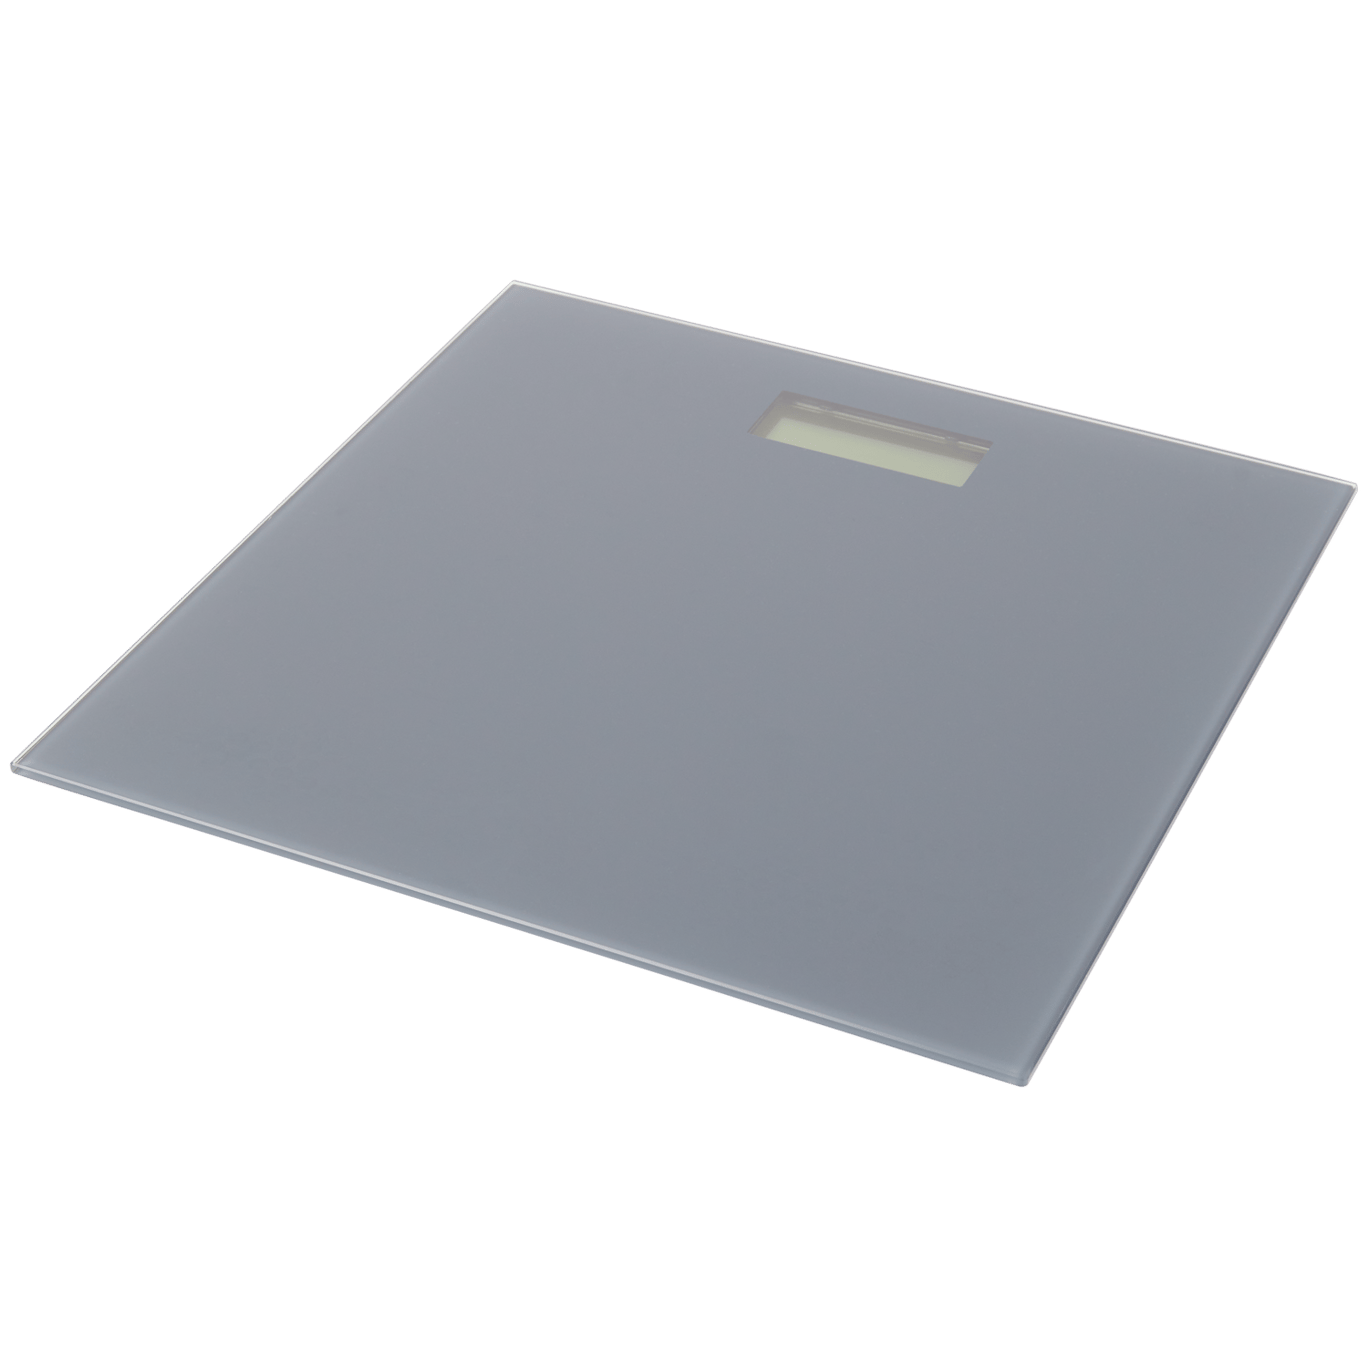 Glass personal scale - Max 150 Kg